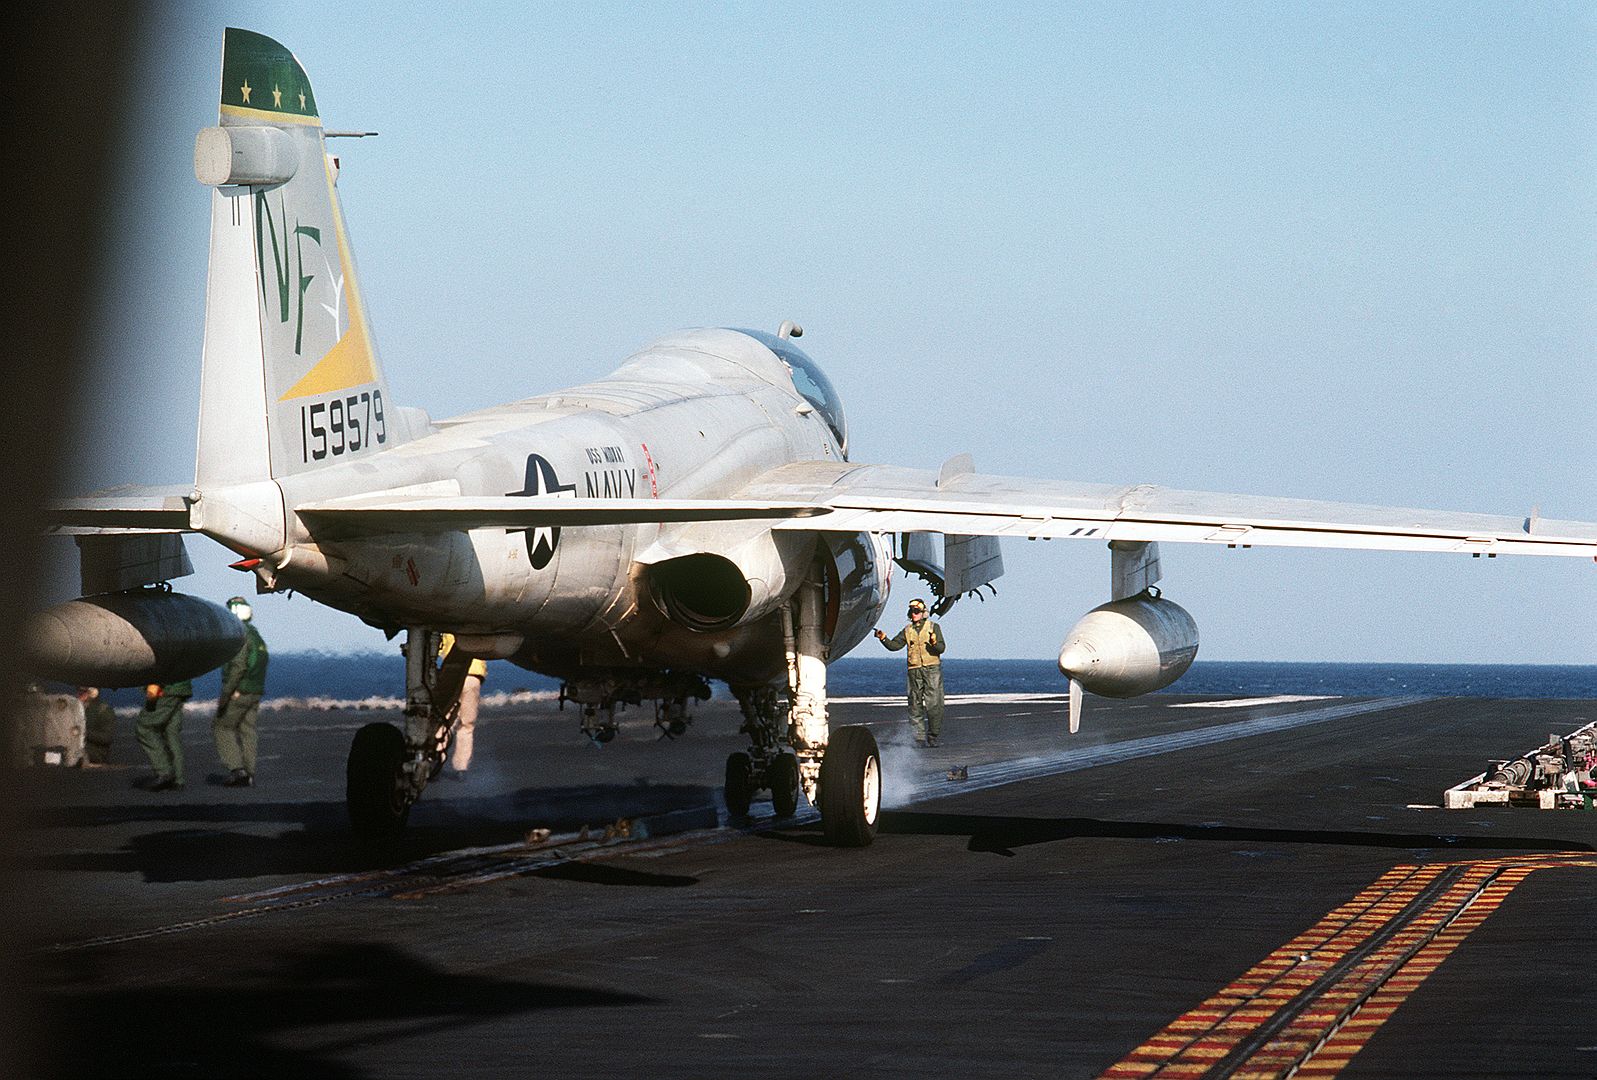 An A 6E Intruder Aircraft Is Positioned On A Catapult On The Flight Deck Of The Aircraft Carrier USS MIDWAY 